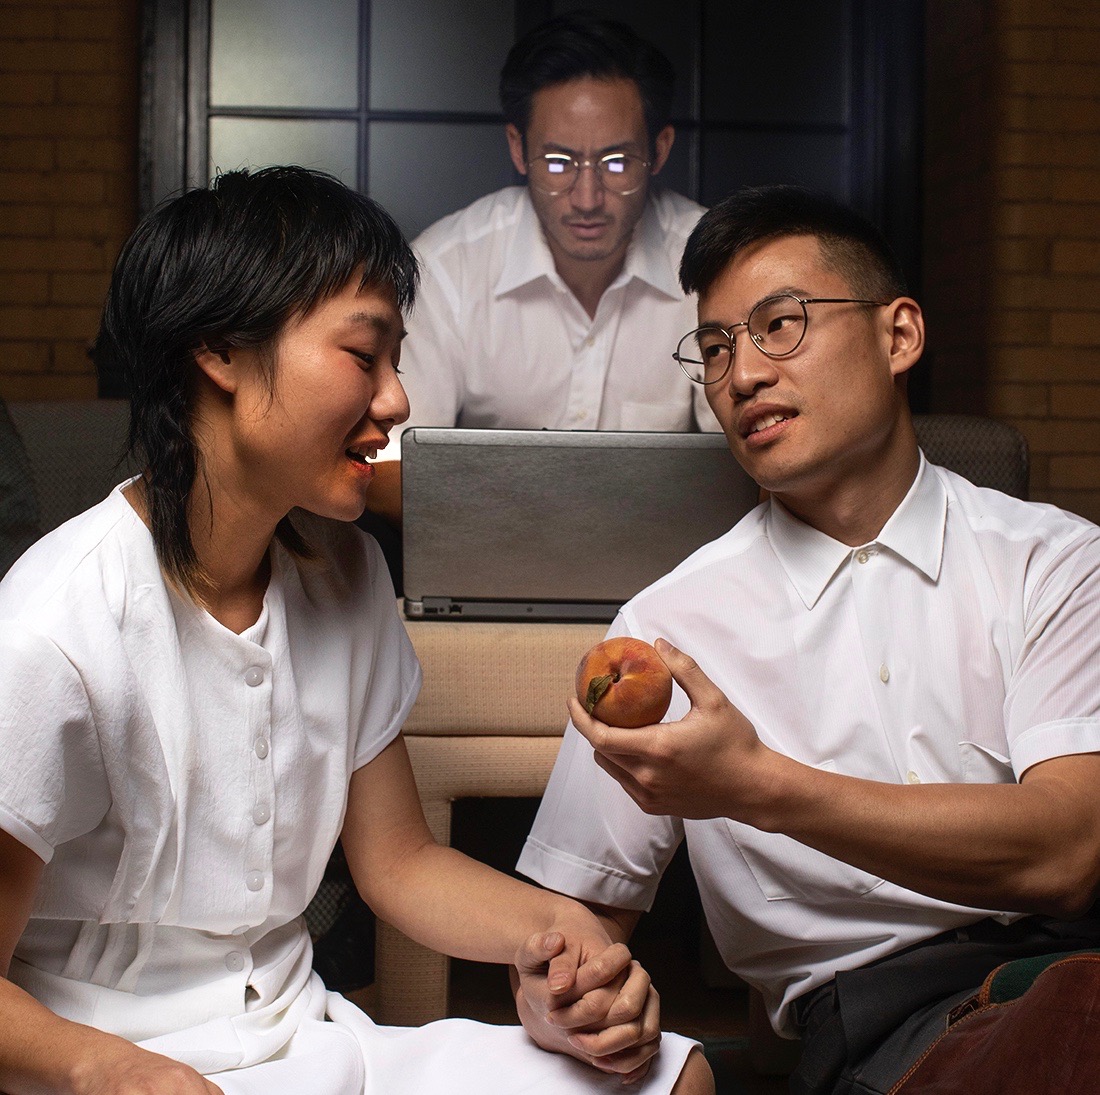 Zhang Lin (Hansel Tan, center) has flashbacks. His younger self and long-lost love come to life repeatedly, played by Tobias C. Wong and Ariel Xiu.